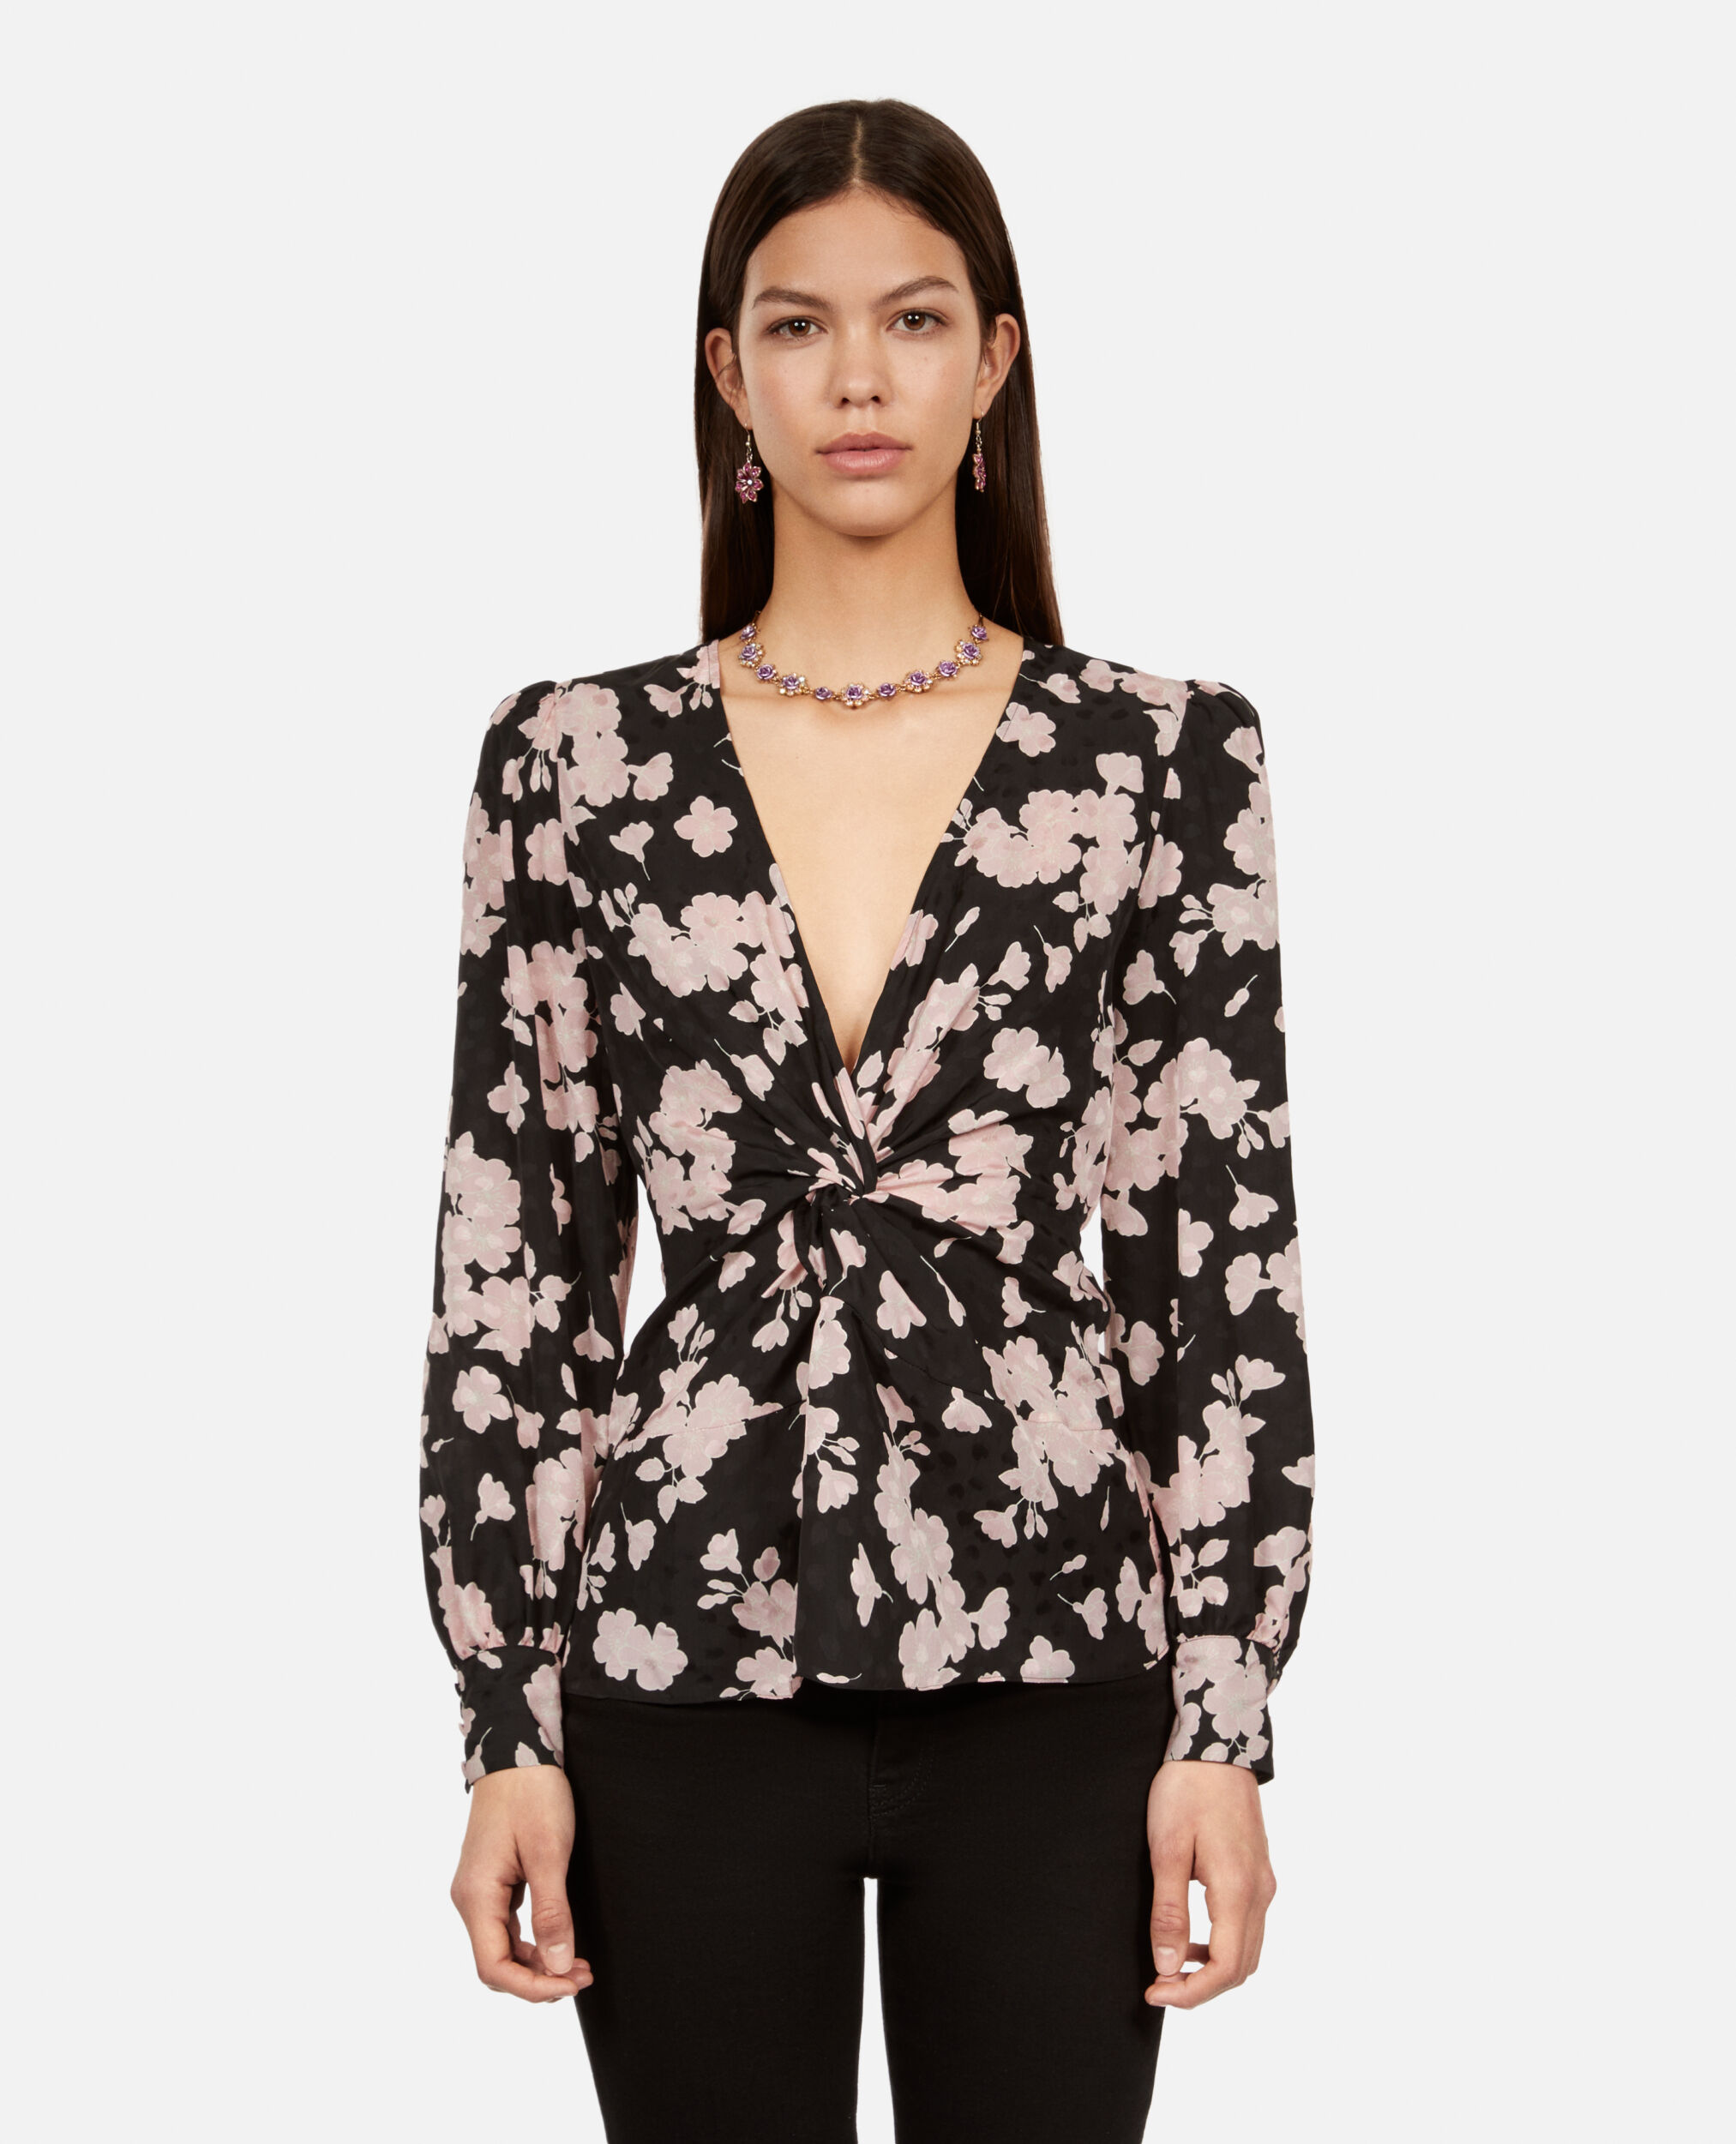 Printed top with draping, BLACK / PINK, hi-res image number null